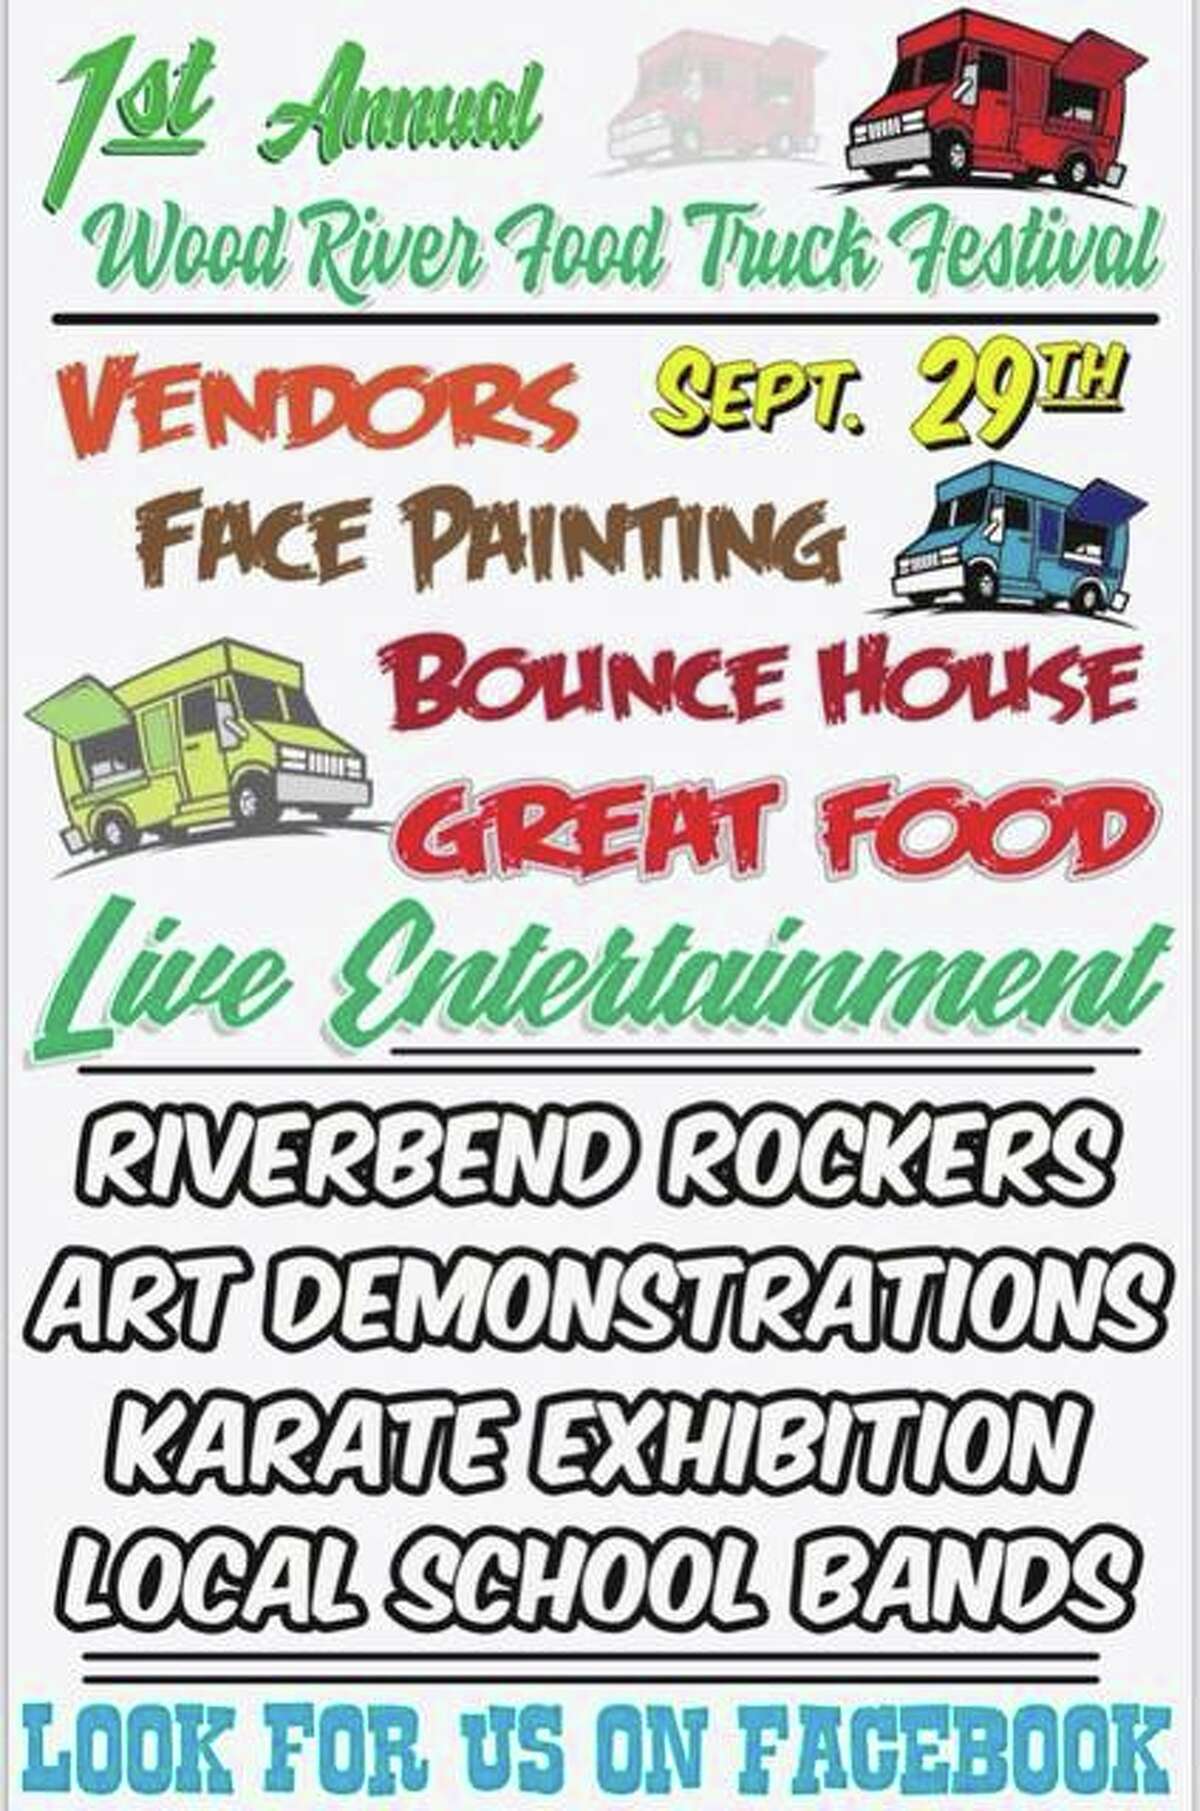 The city’s first food truck festival is scheduled for Saturday, Sept. 29 from 11 a.m. to 4 p.m. with event grounds extending from Wood River Avenue to Second Street on Ferguson Avenue, sponsored by Downtown Wood River Small Business Committee. Art demonstrations, school band performances, live entertainment and other activities will be at the festival, as four food trucks — Doughboy’s Wood Fired Pizza, Wayno’s-Mobile International Cuisine, StLouisianaQ Food Truck, and a dessert truck — will be features of the event. The festival is free and open to the Riverbend area.